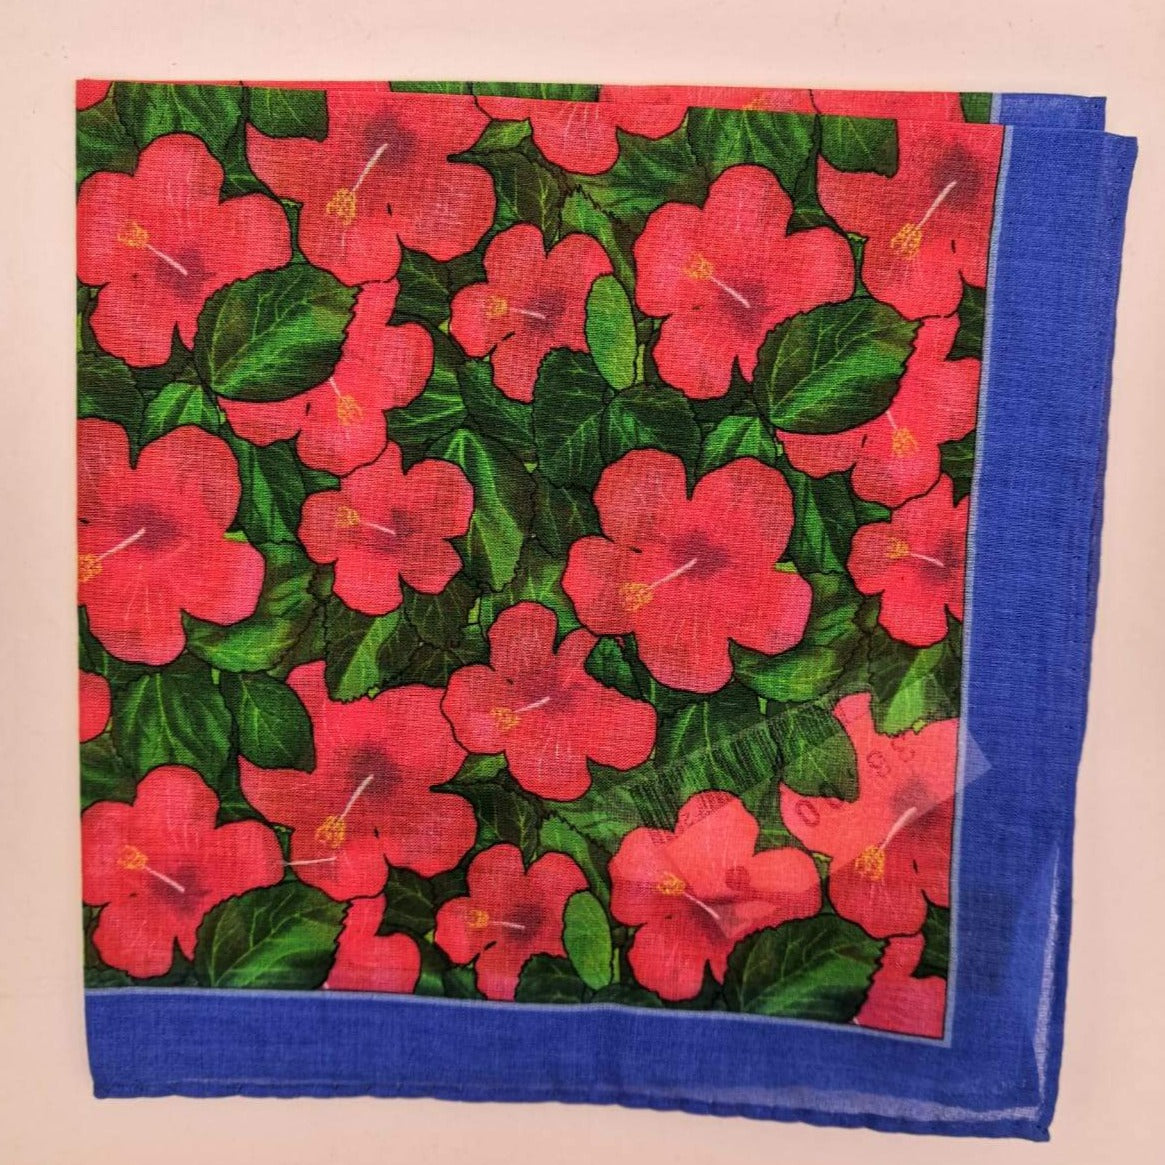 Cruciani & Bella Hand-rolled   Cotton100% Patterned Pocket Square Flower Motif Red,Green and Light Blue Made in Italy 33 cm X 33 cm #0725